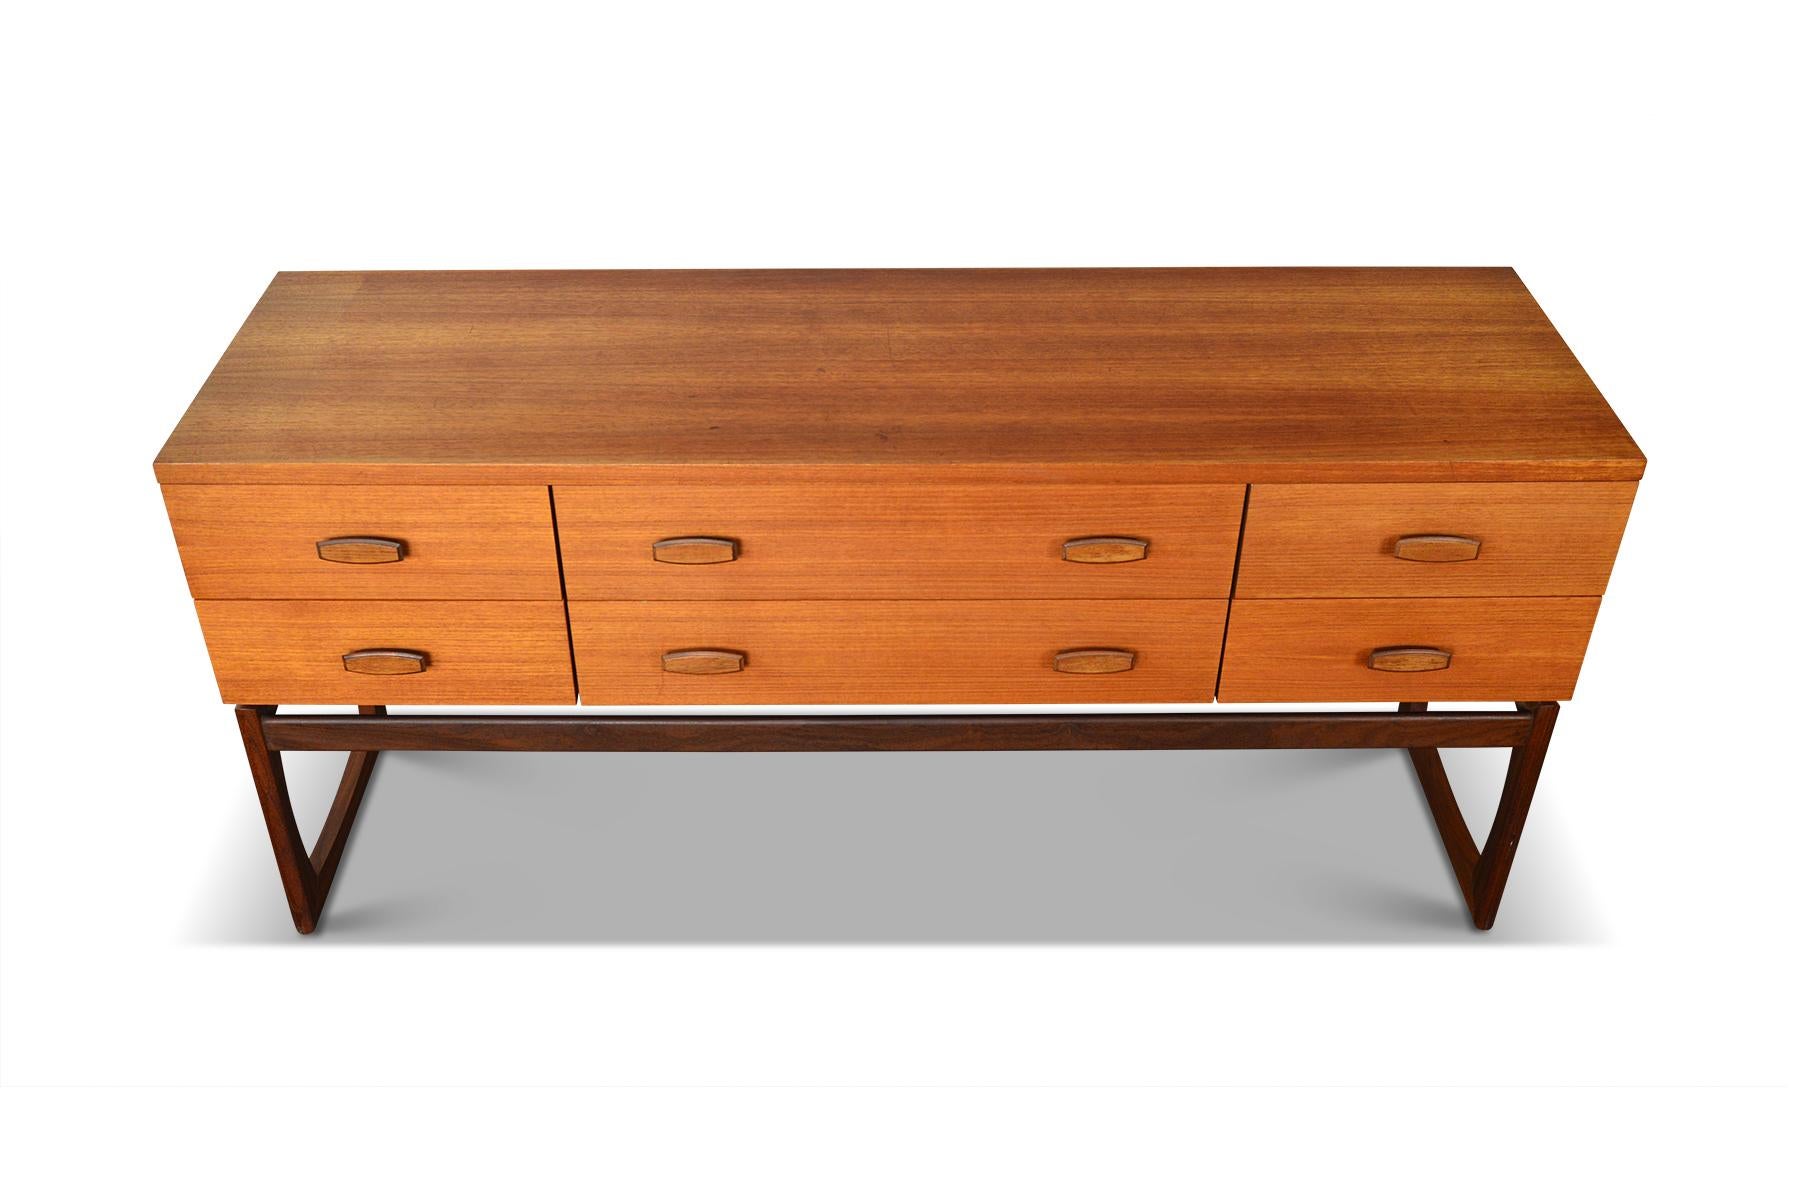 Origin: England
Designer: Victor B. Wilkins
Manufacturer: G Plan
Era: 1964
Materials: Teak, Rosewood, Afromosia
Measurements: 60? wide x 19? deep x 28? tall

Condition: In excellent original condition with typical wear for its vintage. Price